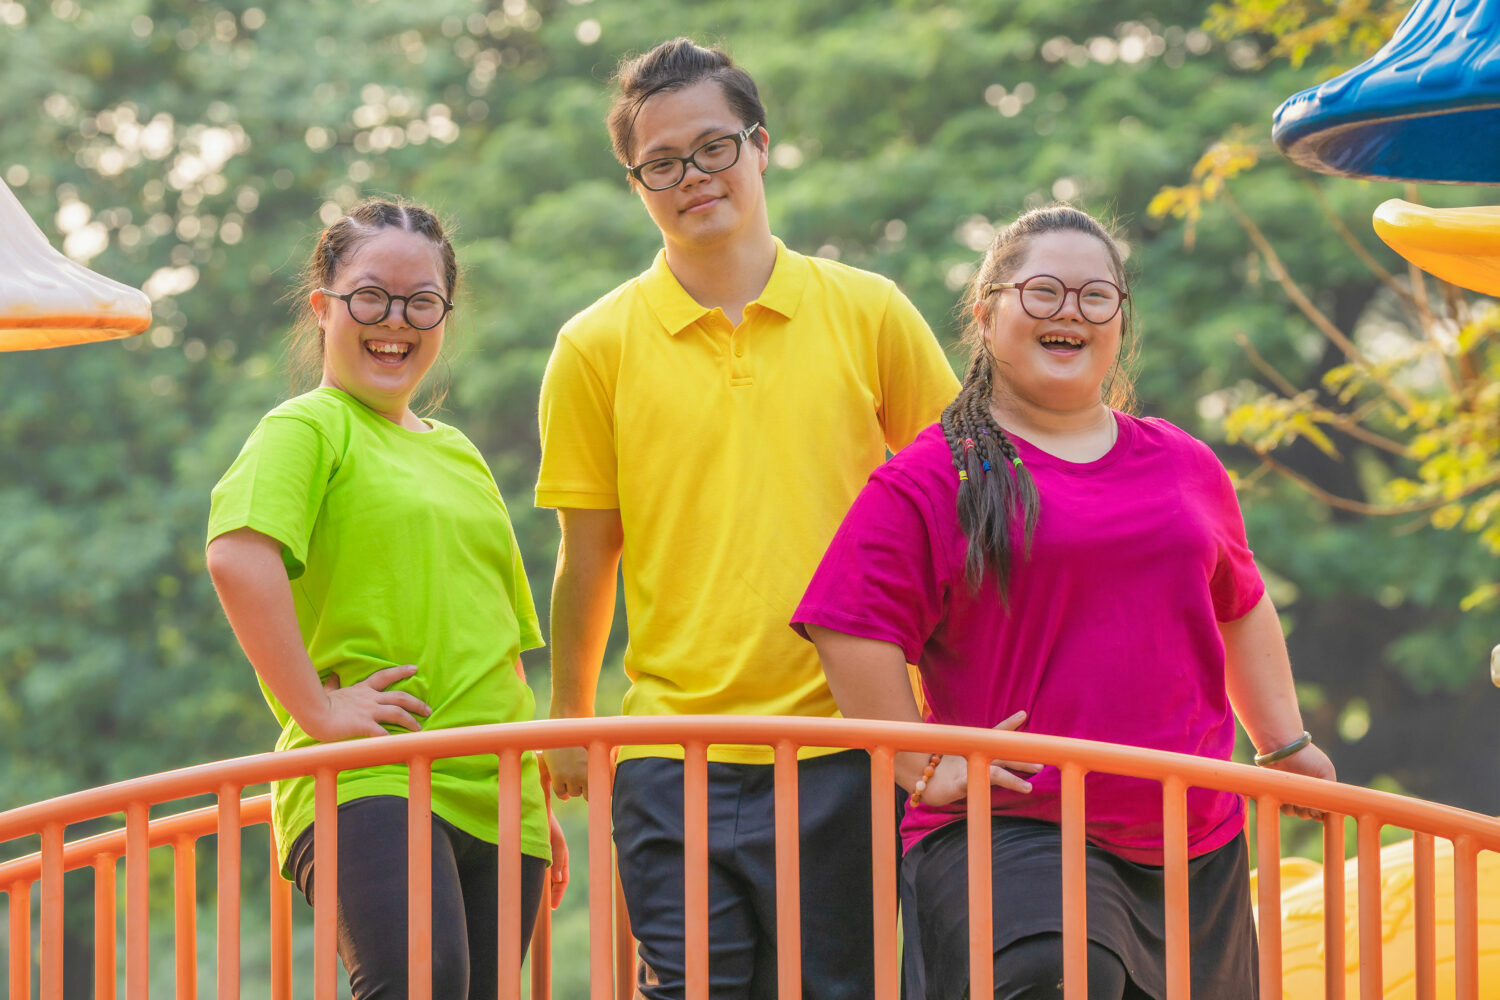 3 Asian young adults with Down syndrome stand together on playground bridge